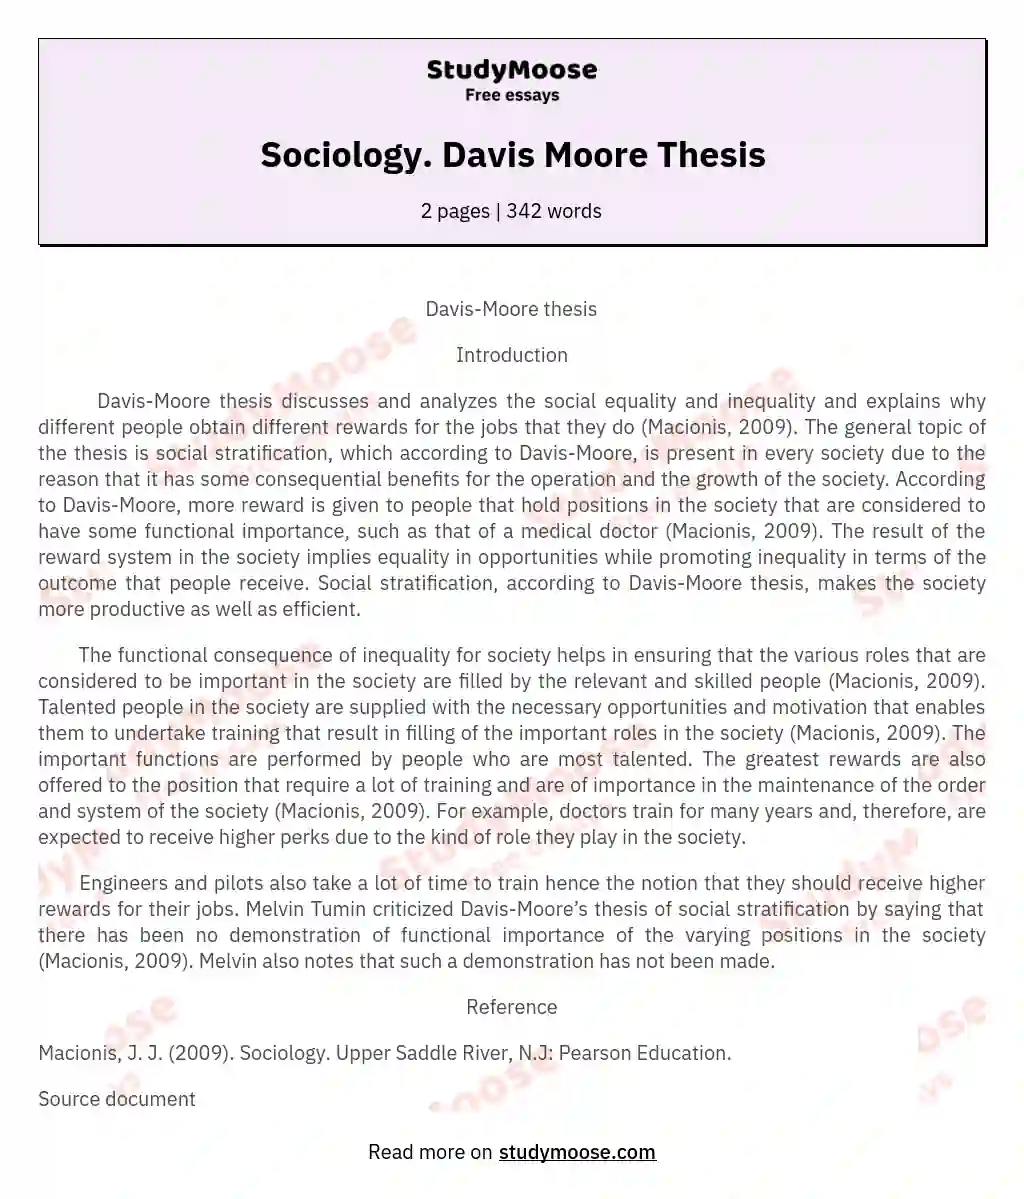 title for thesis in sociology